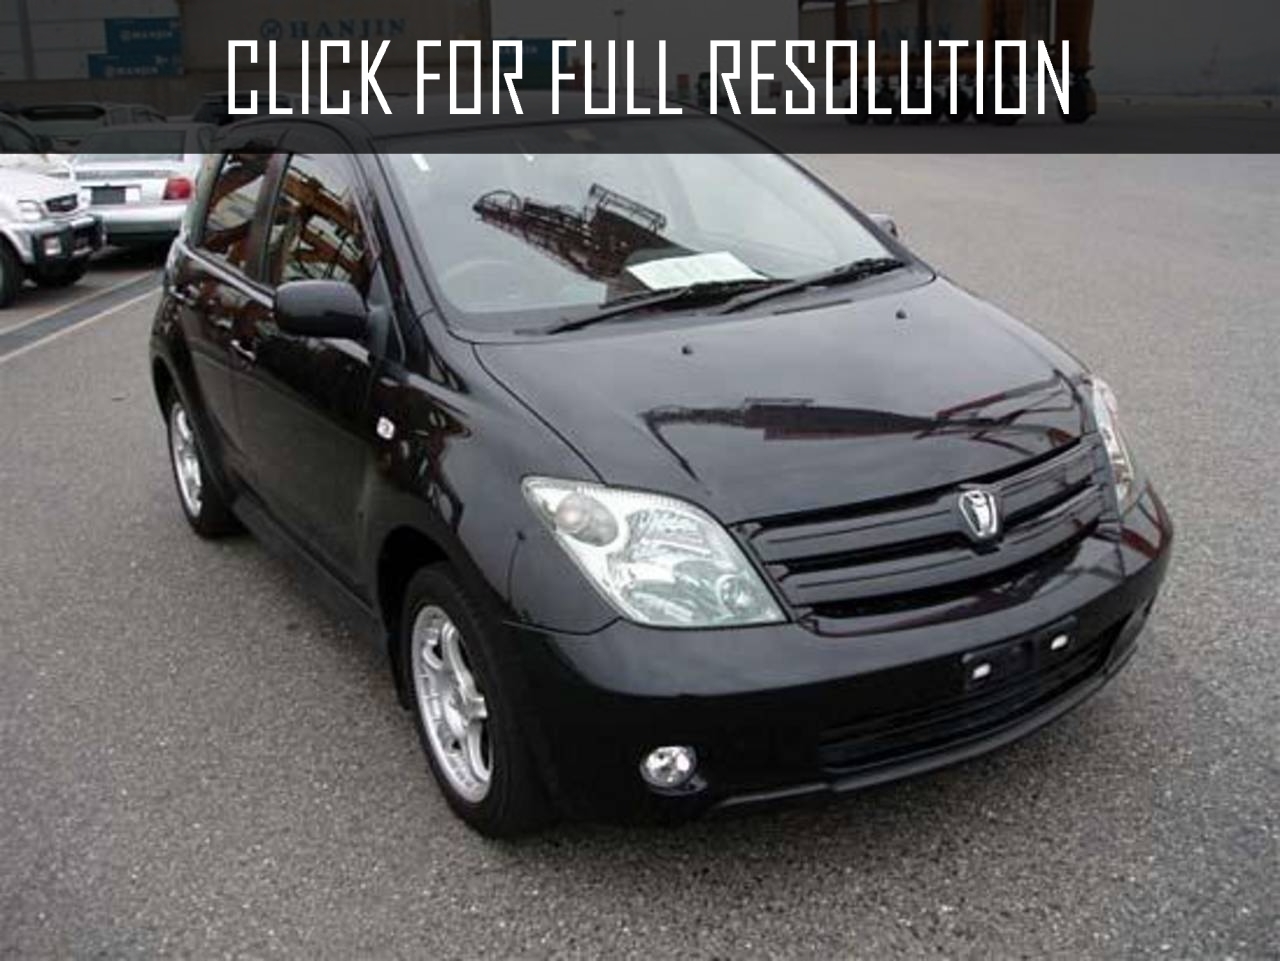 Toyota Ist 2003 Reviews Prices Ratings With Various Photos